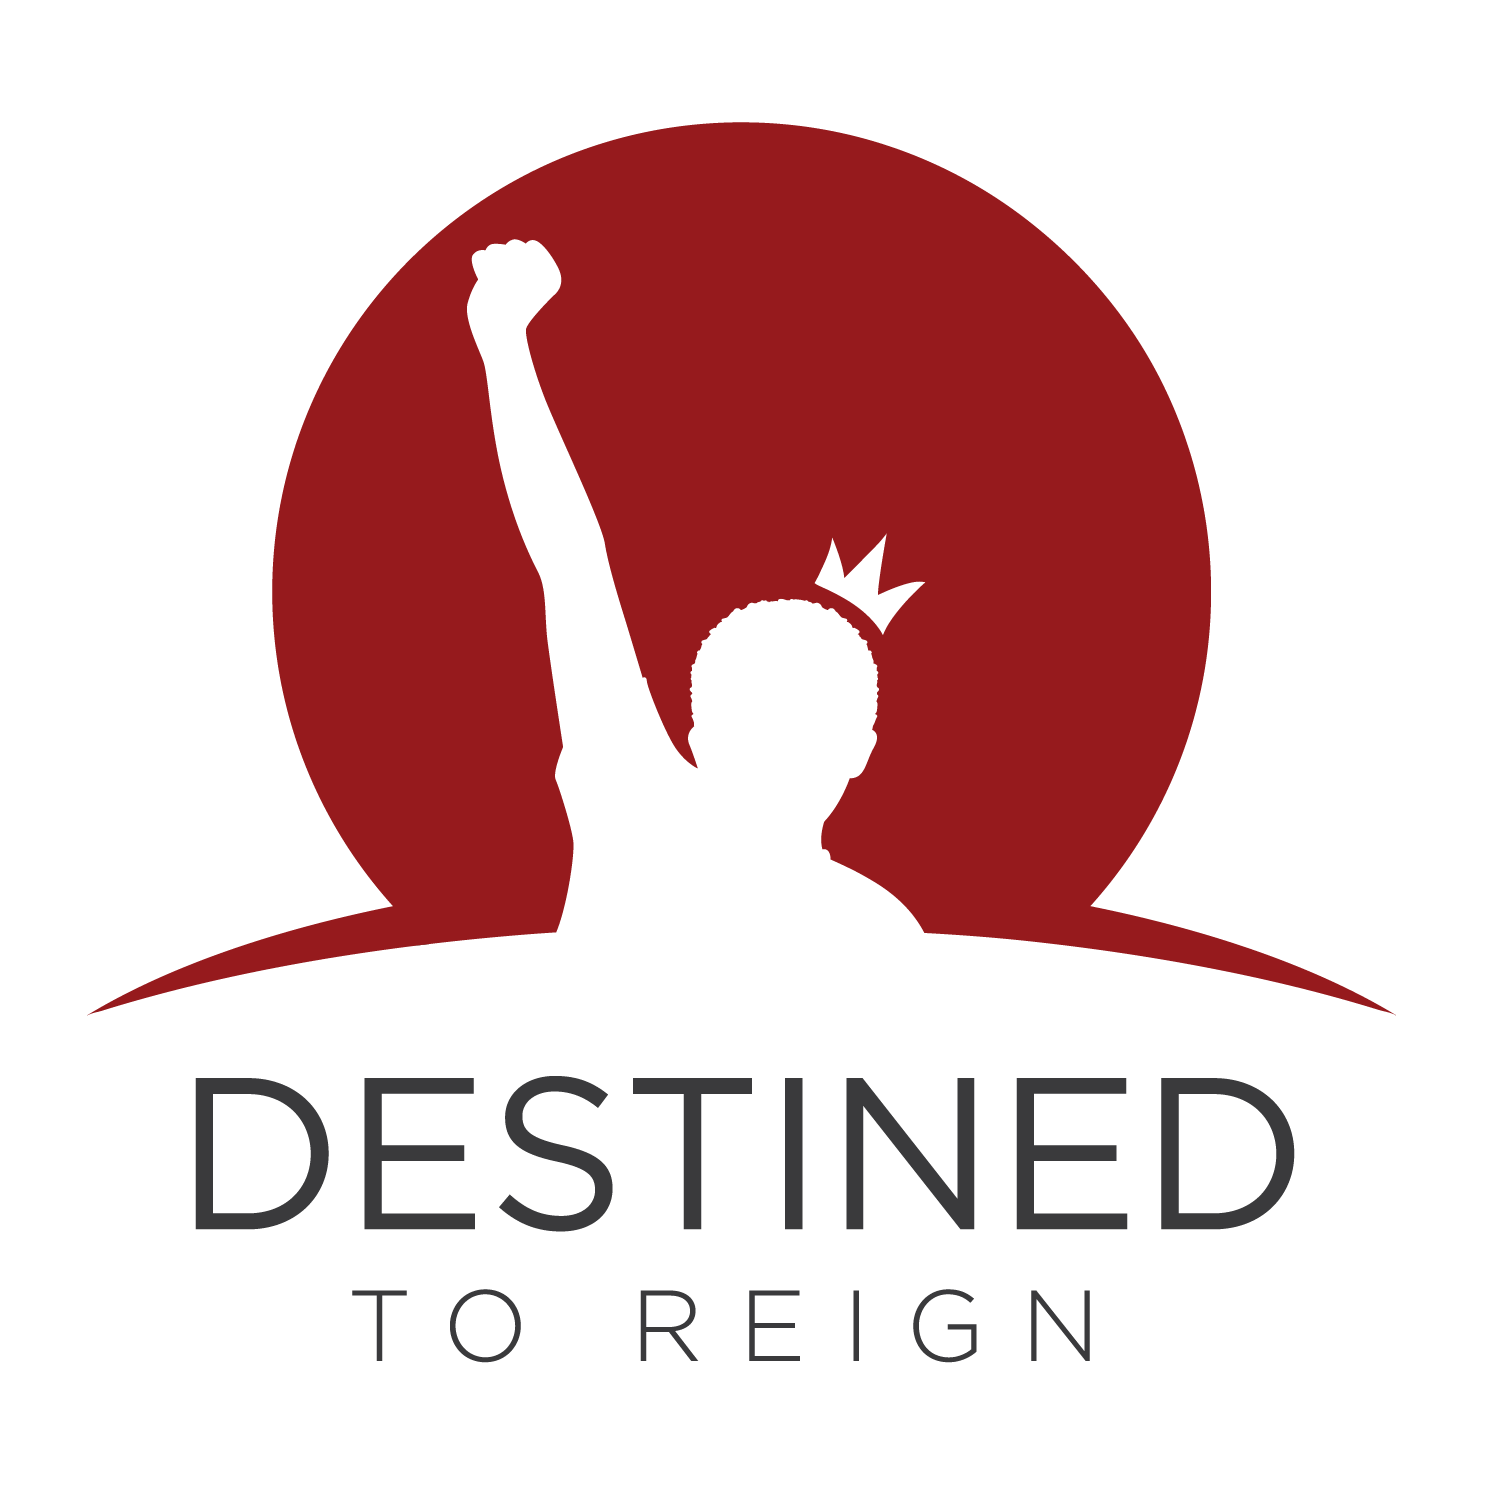 DESTINED TO REIGN